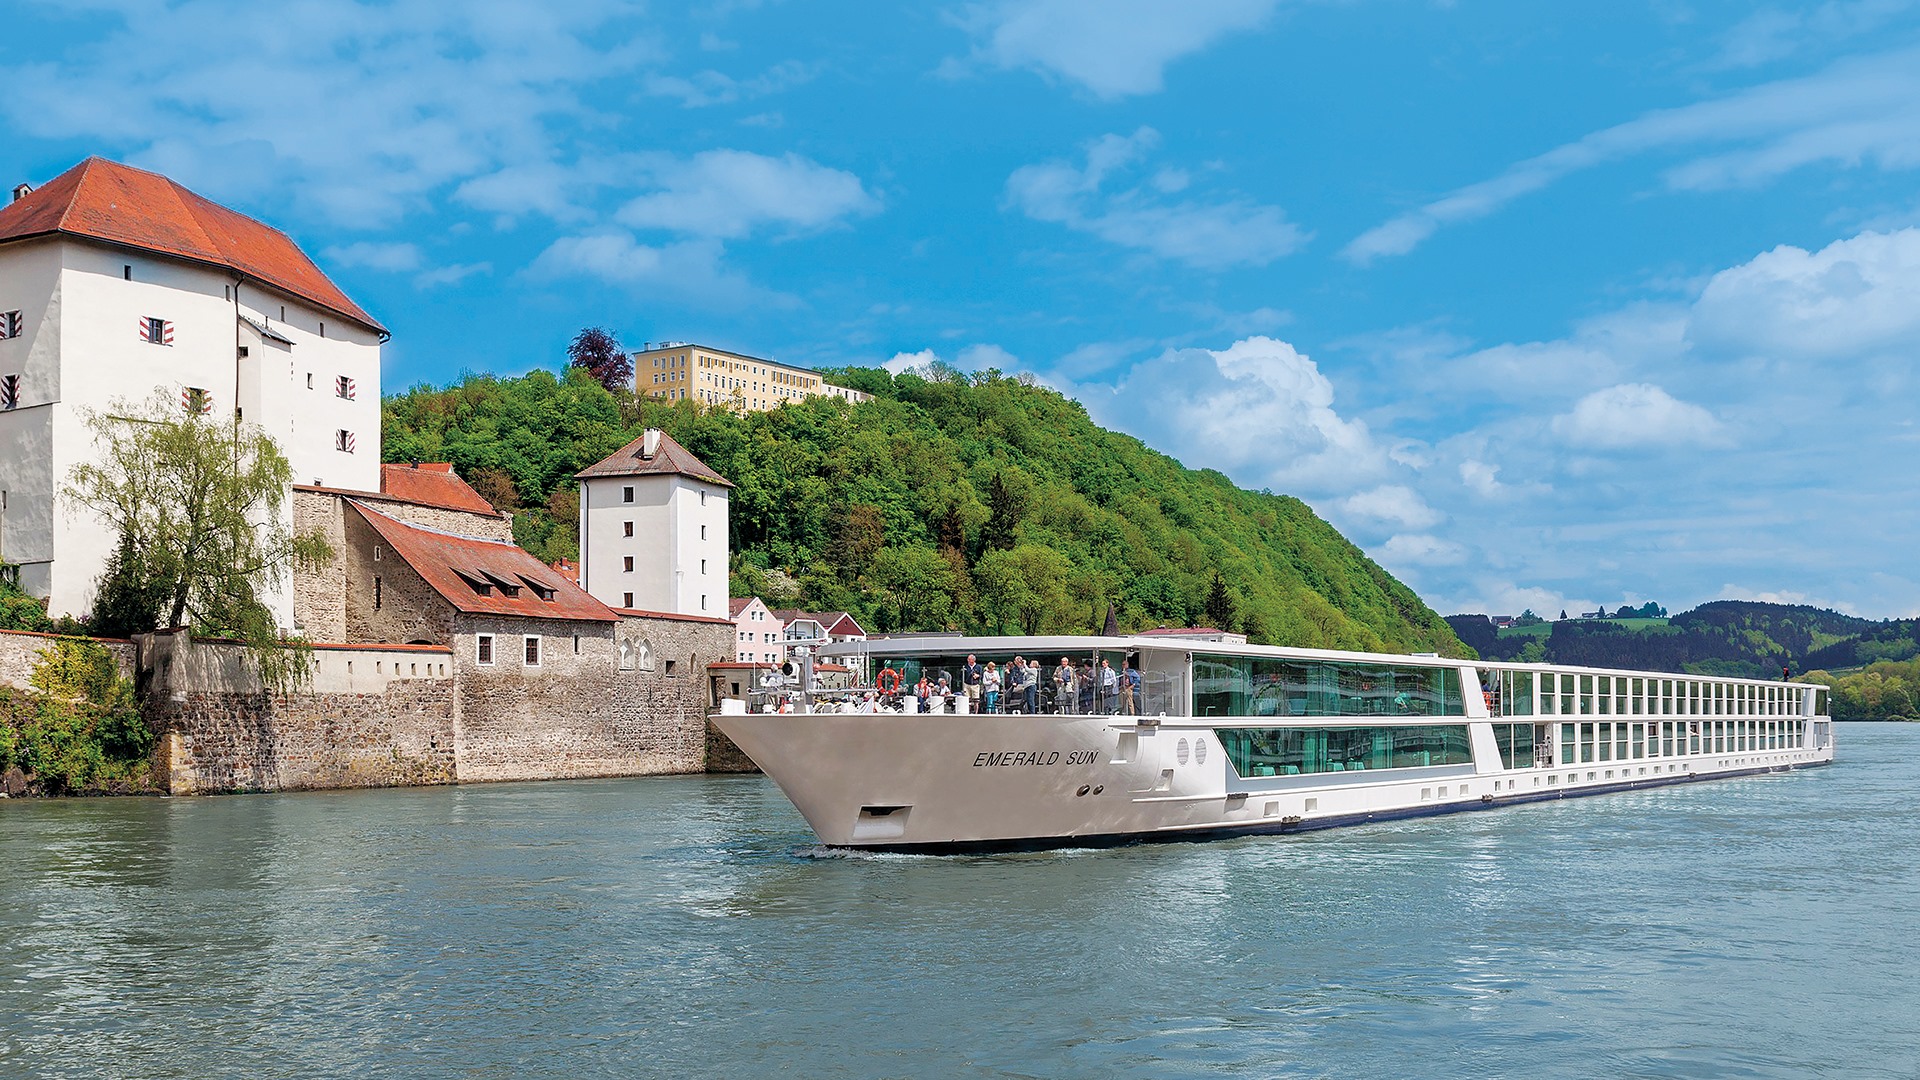 Scenic Group’s two award-winning river lines - Scenic Luxury Cruises & Tours and Emerald Cruises – will start their 2021 European river cruise season on Portugal’s Douro River from July 30 and July 31, 2021, respectively. 